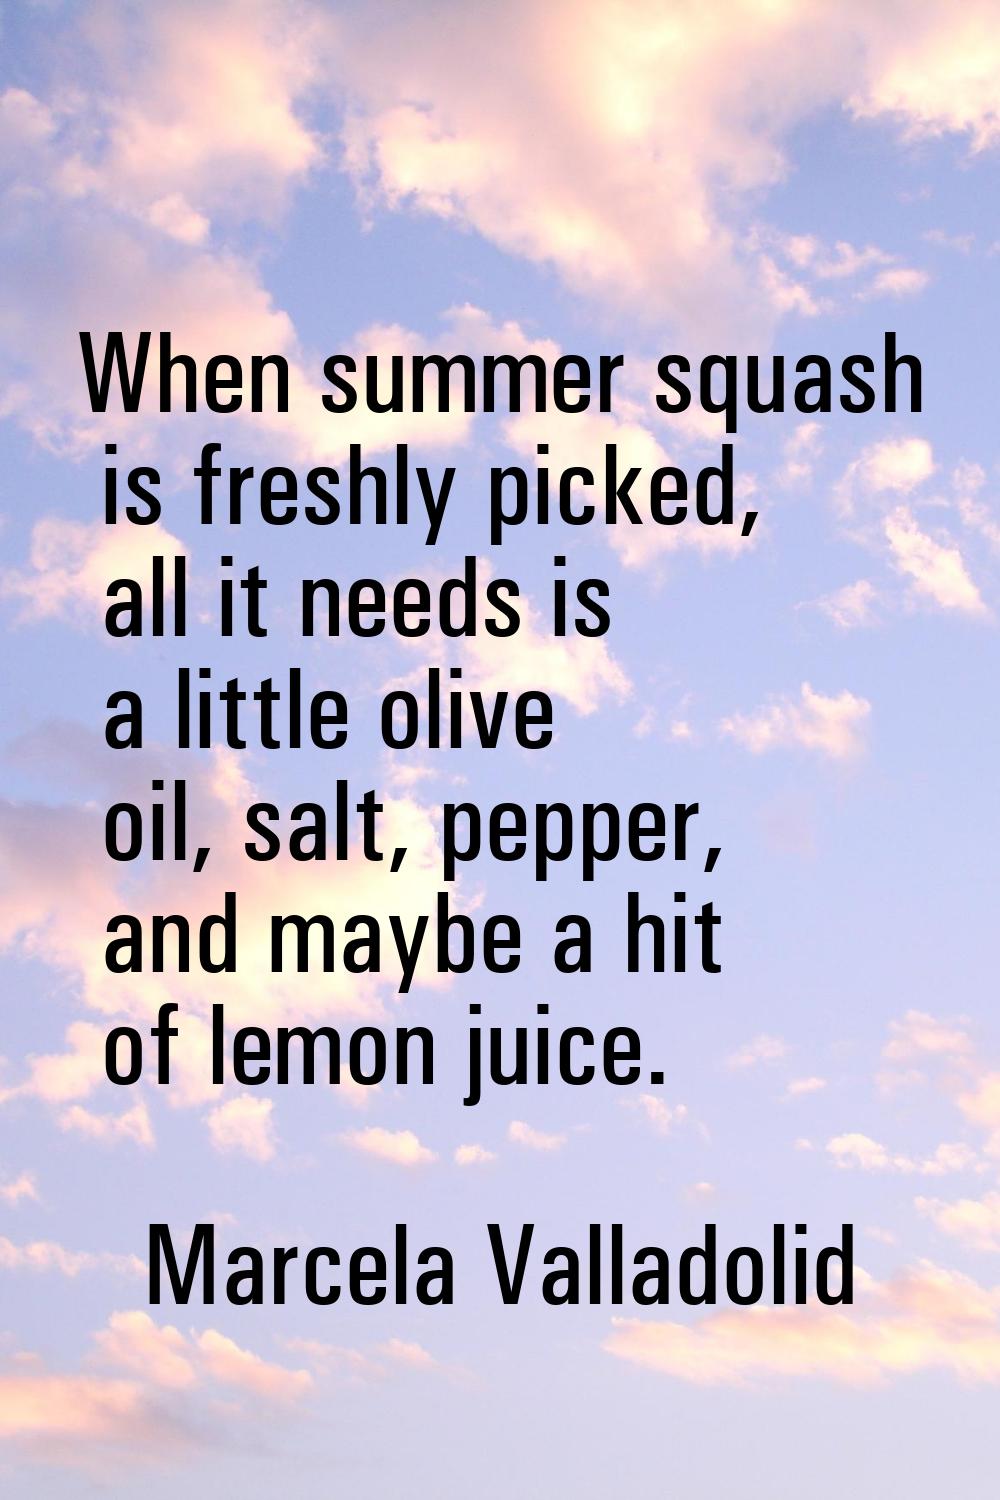 When summer squash is freshly picked, all it needs is a little olive oil, salt, pepper, and maybe a